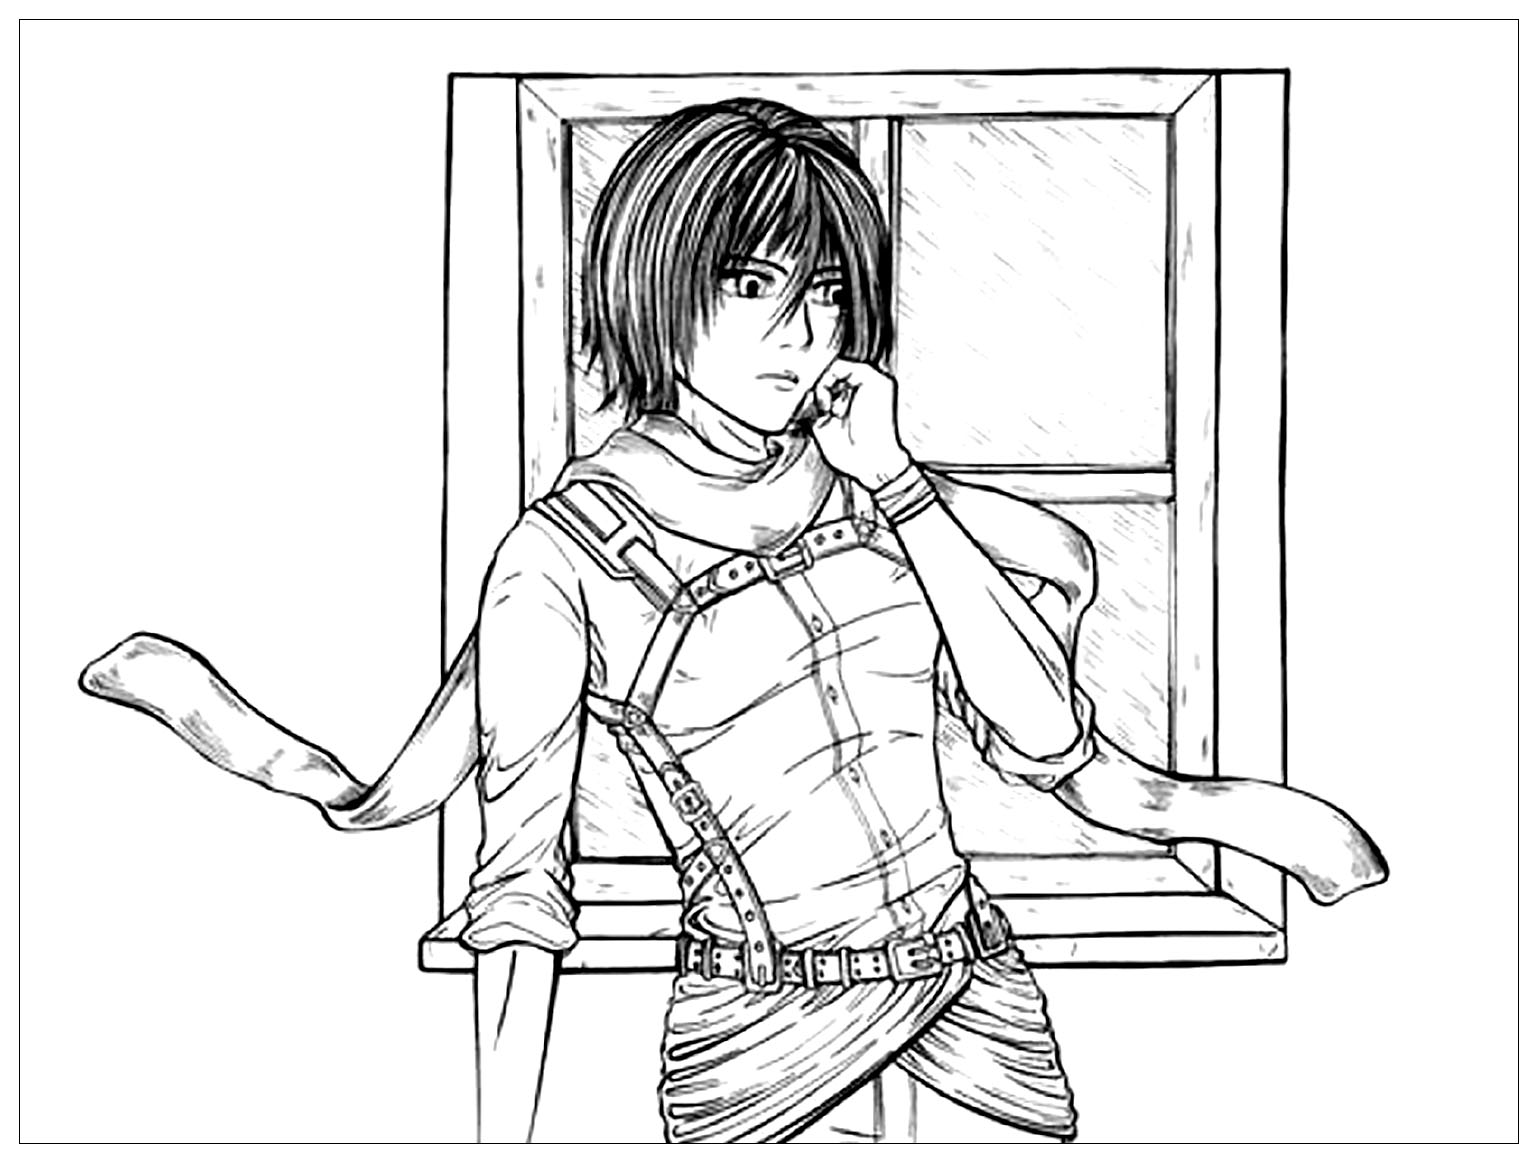 Mikasa Ackerman From AOT Coloring Pages - AOT Coloring Pages - Coloring  Pages For Kids And Adults